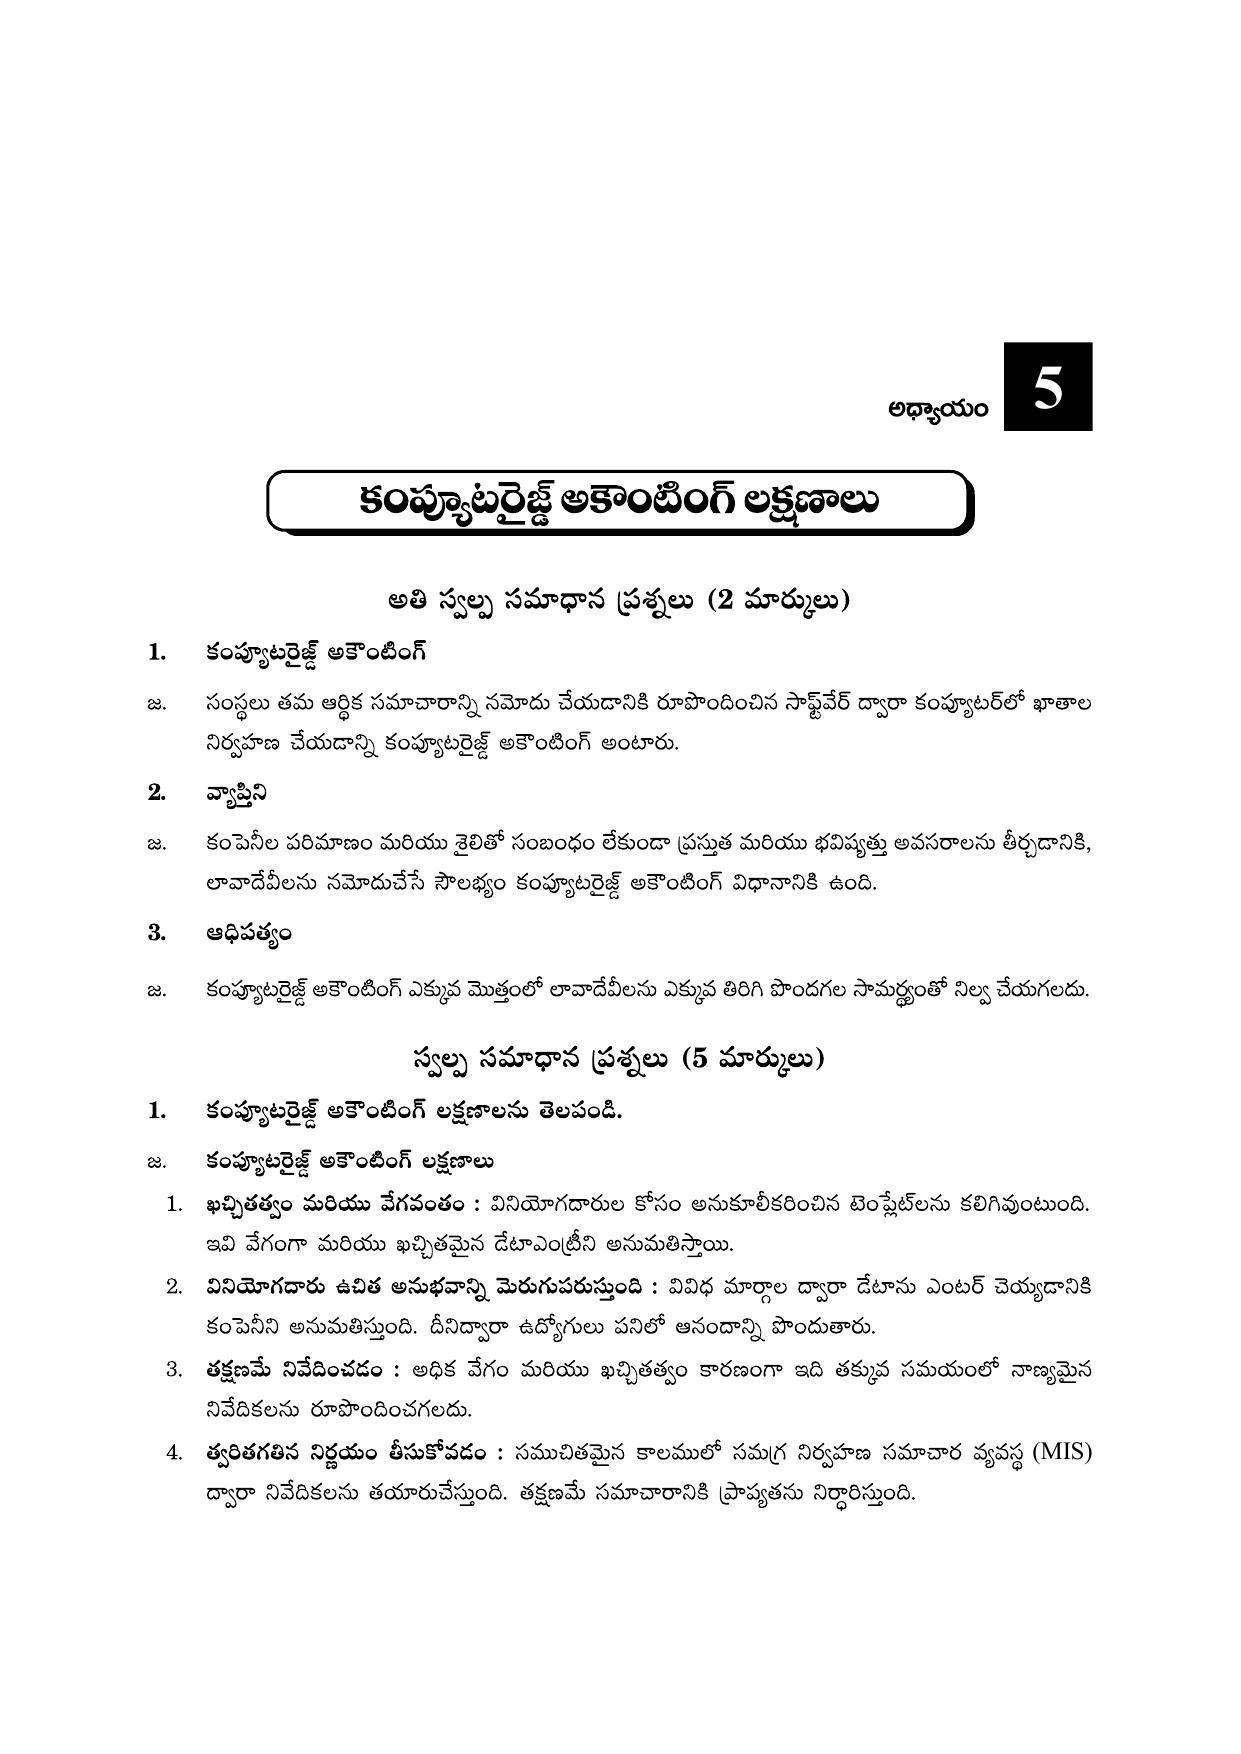 TS SCERT Inter 2nd Year Commerce &Accts II yr TM Path 1 (Telugu Medium) Text Book - Page 50